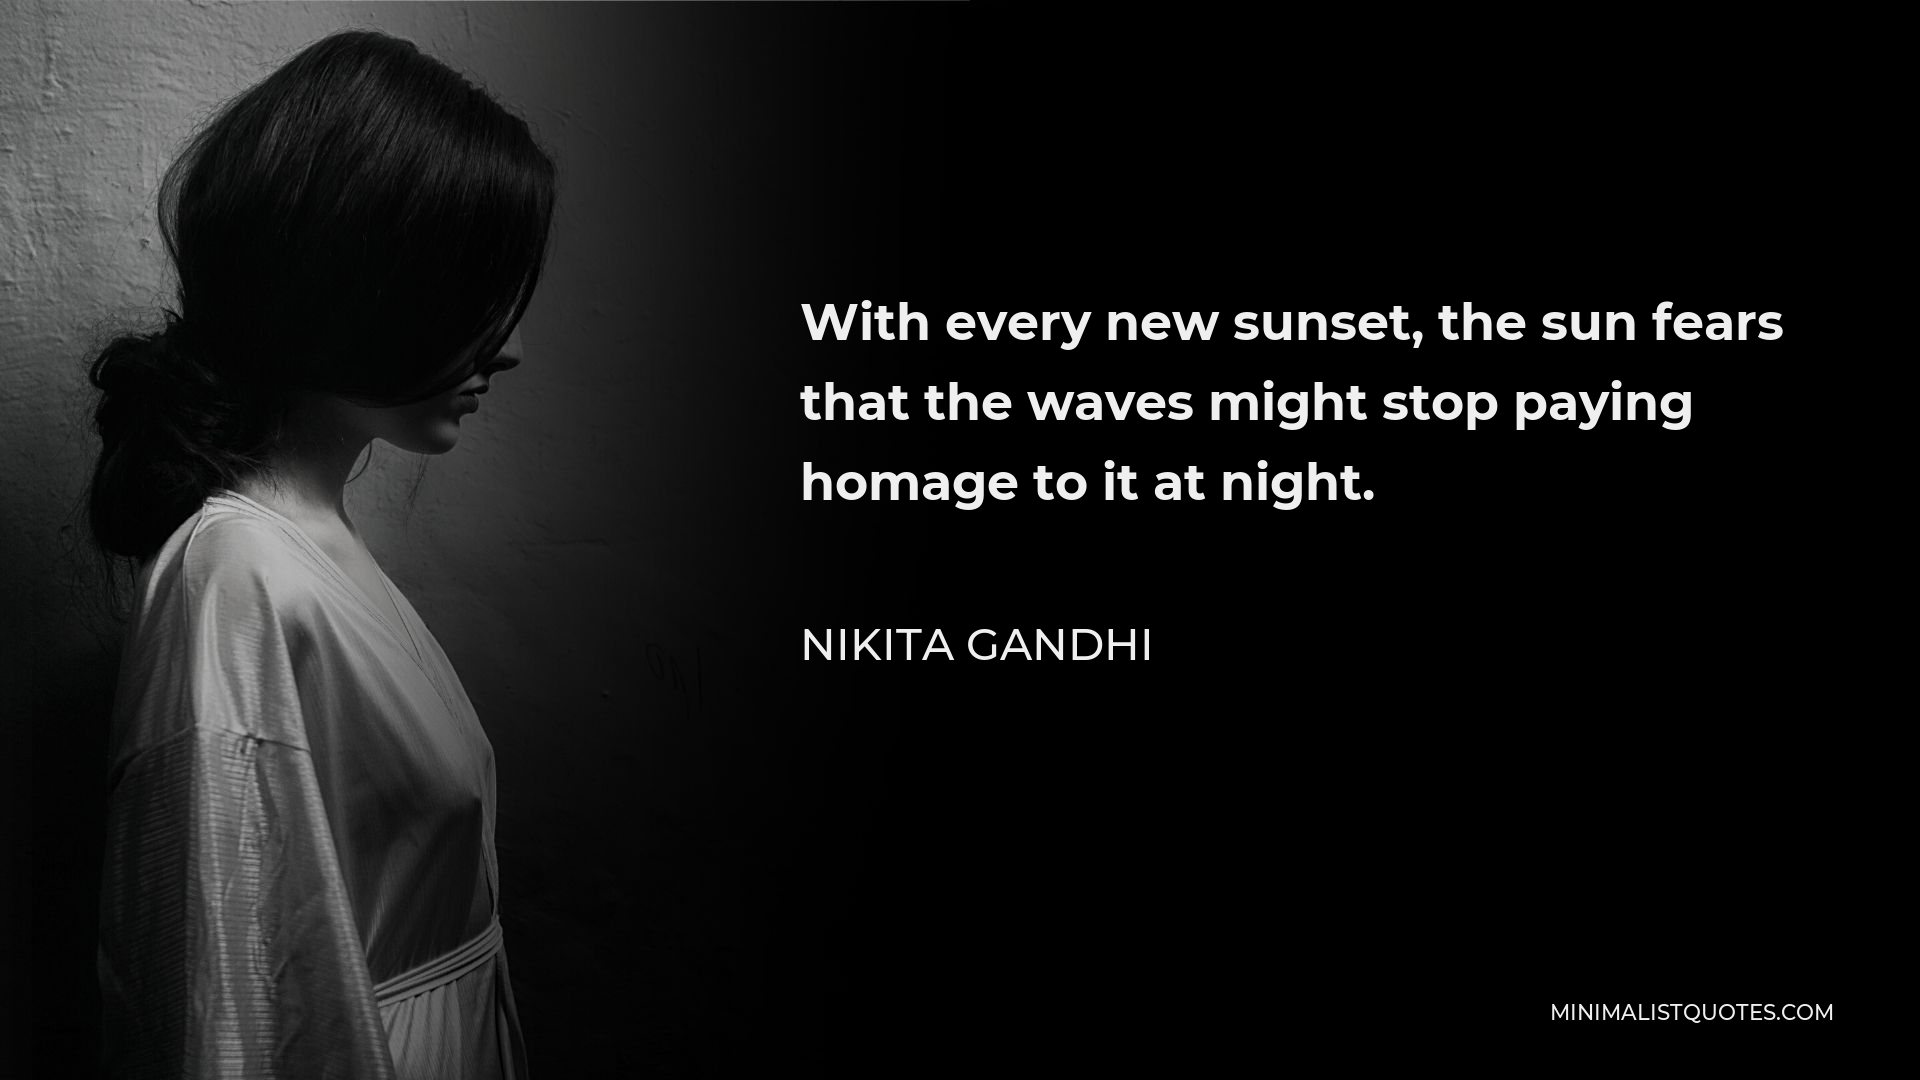 Nikita Gandhi Quote - With every new sunset, the sun fears that the waves might stop paying homage to it at night.